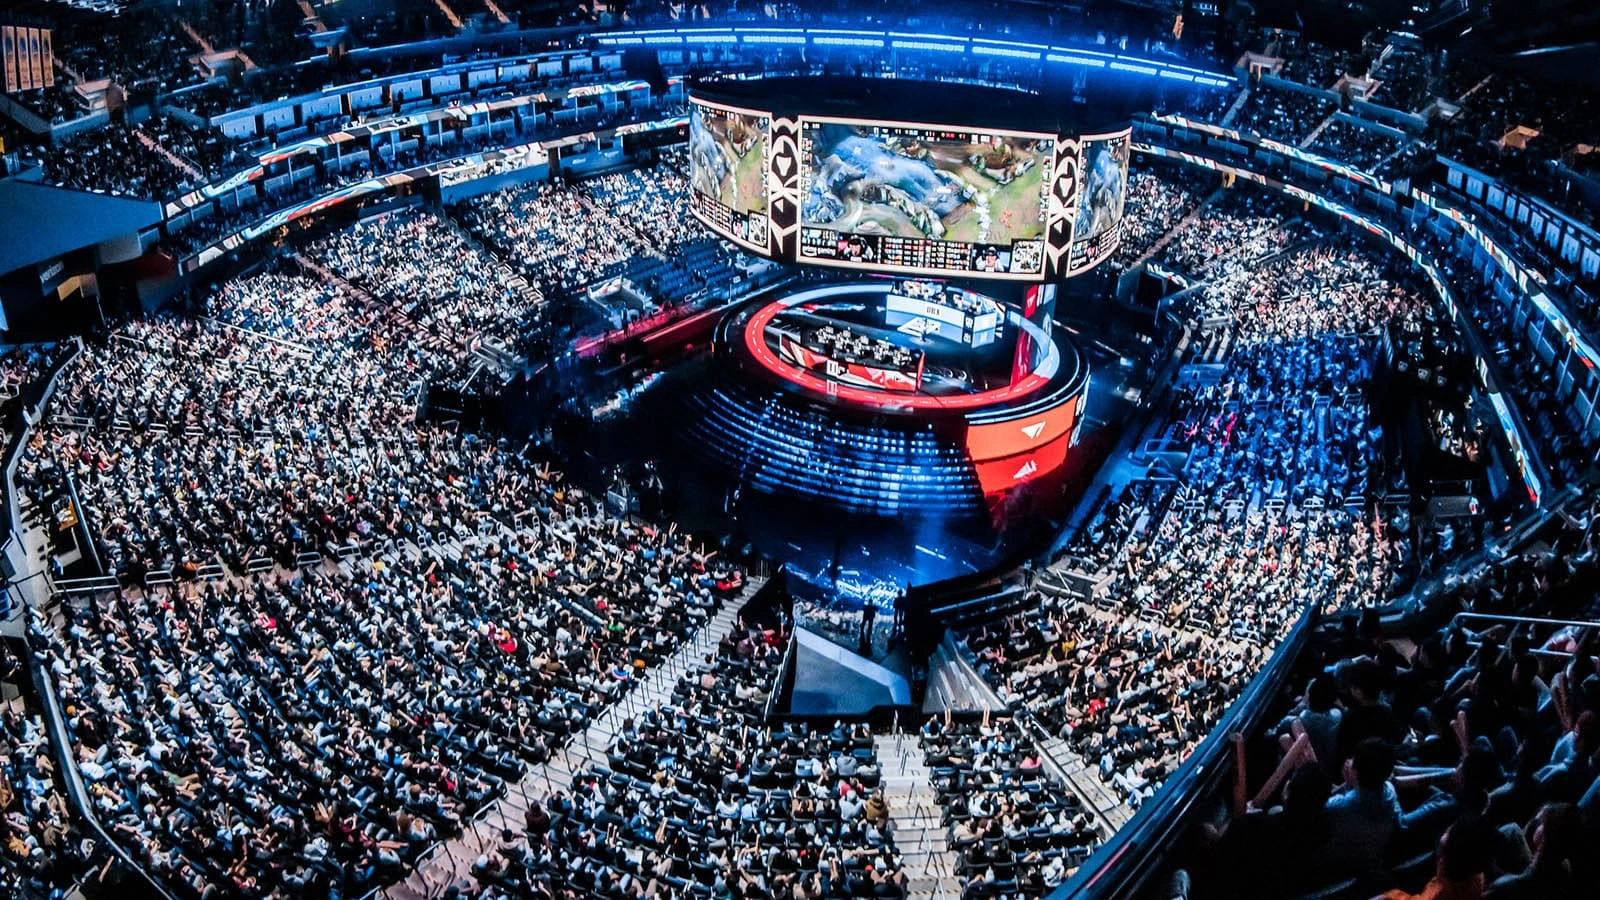 Riot confirms: 2022 World Championship to be held in North America - League  of Legends